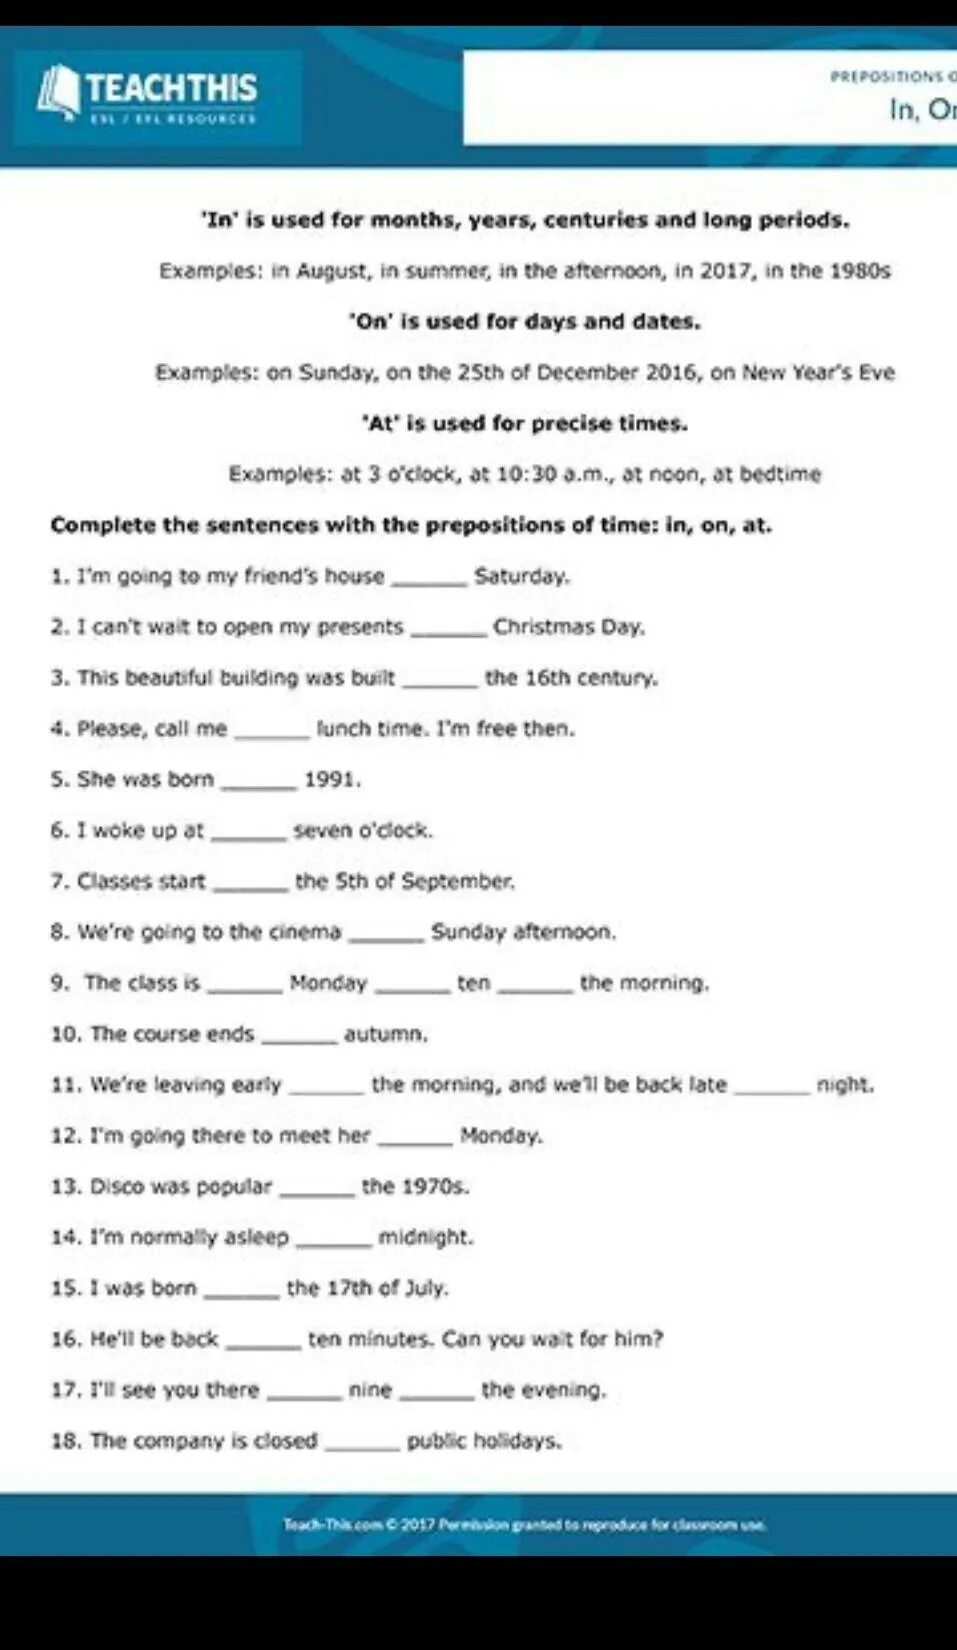 Prepositions of time Worksheets. Prepositions of time Grammar. In on at в английском языке Worksheets. Предлоги at in on в английском языке Worksheets.